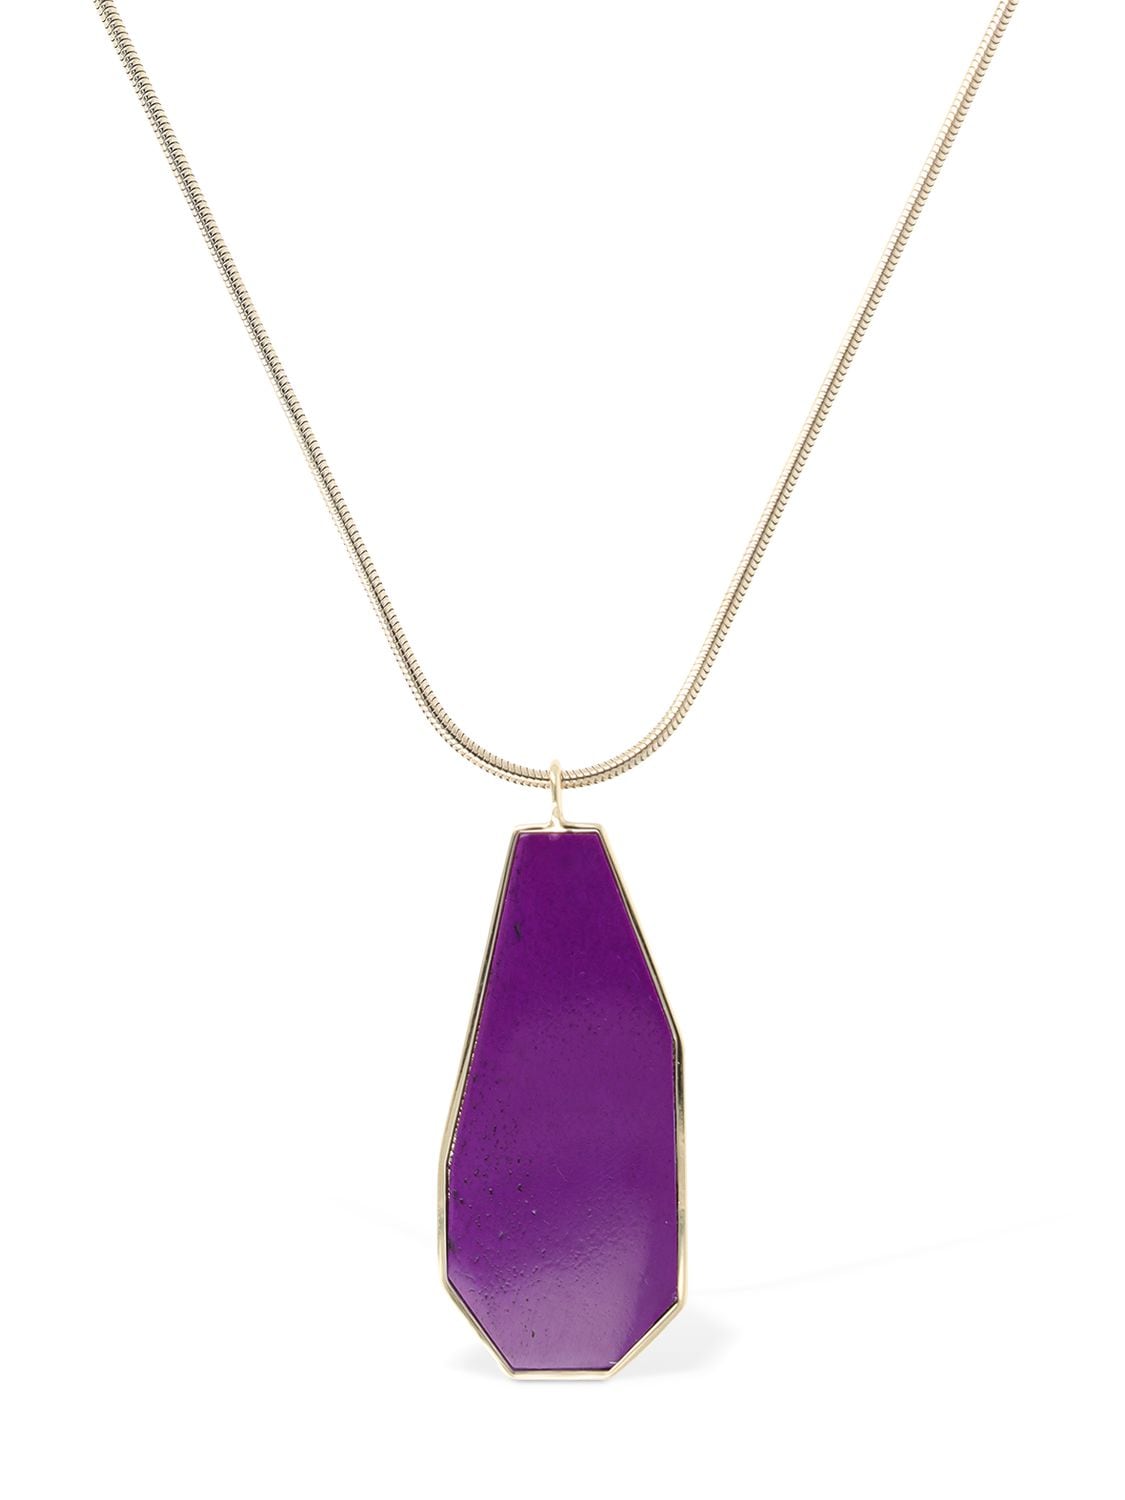 Isabel Marant To Dance Charm Long Necklace In Plum,gold